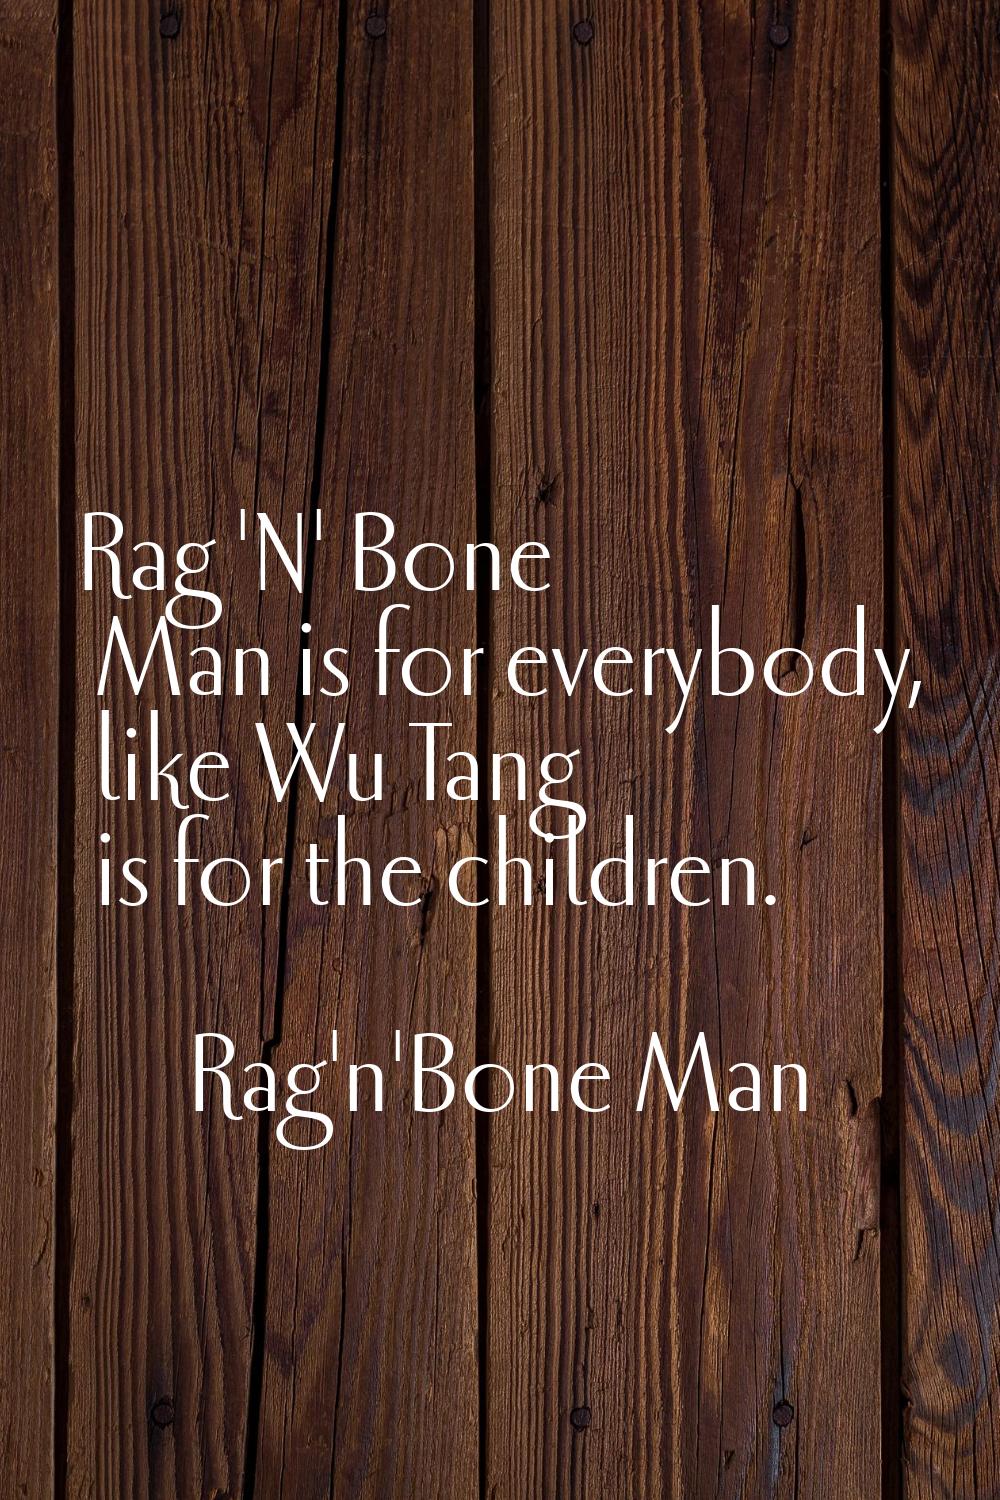 Rag 'N' Bone Man is for everybody, like Wu Tang is for the children.